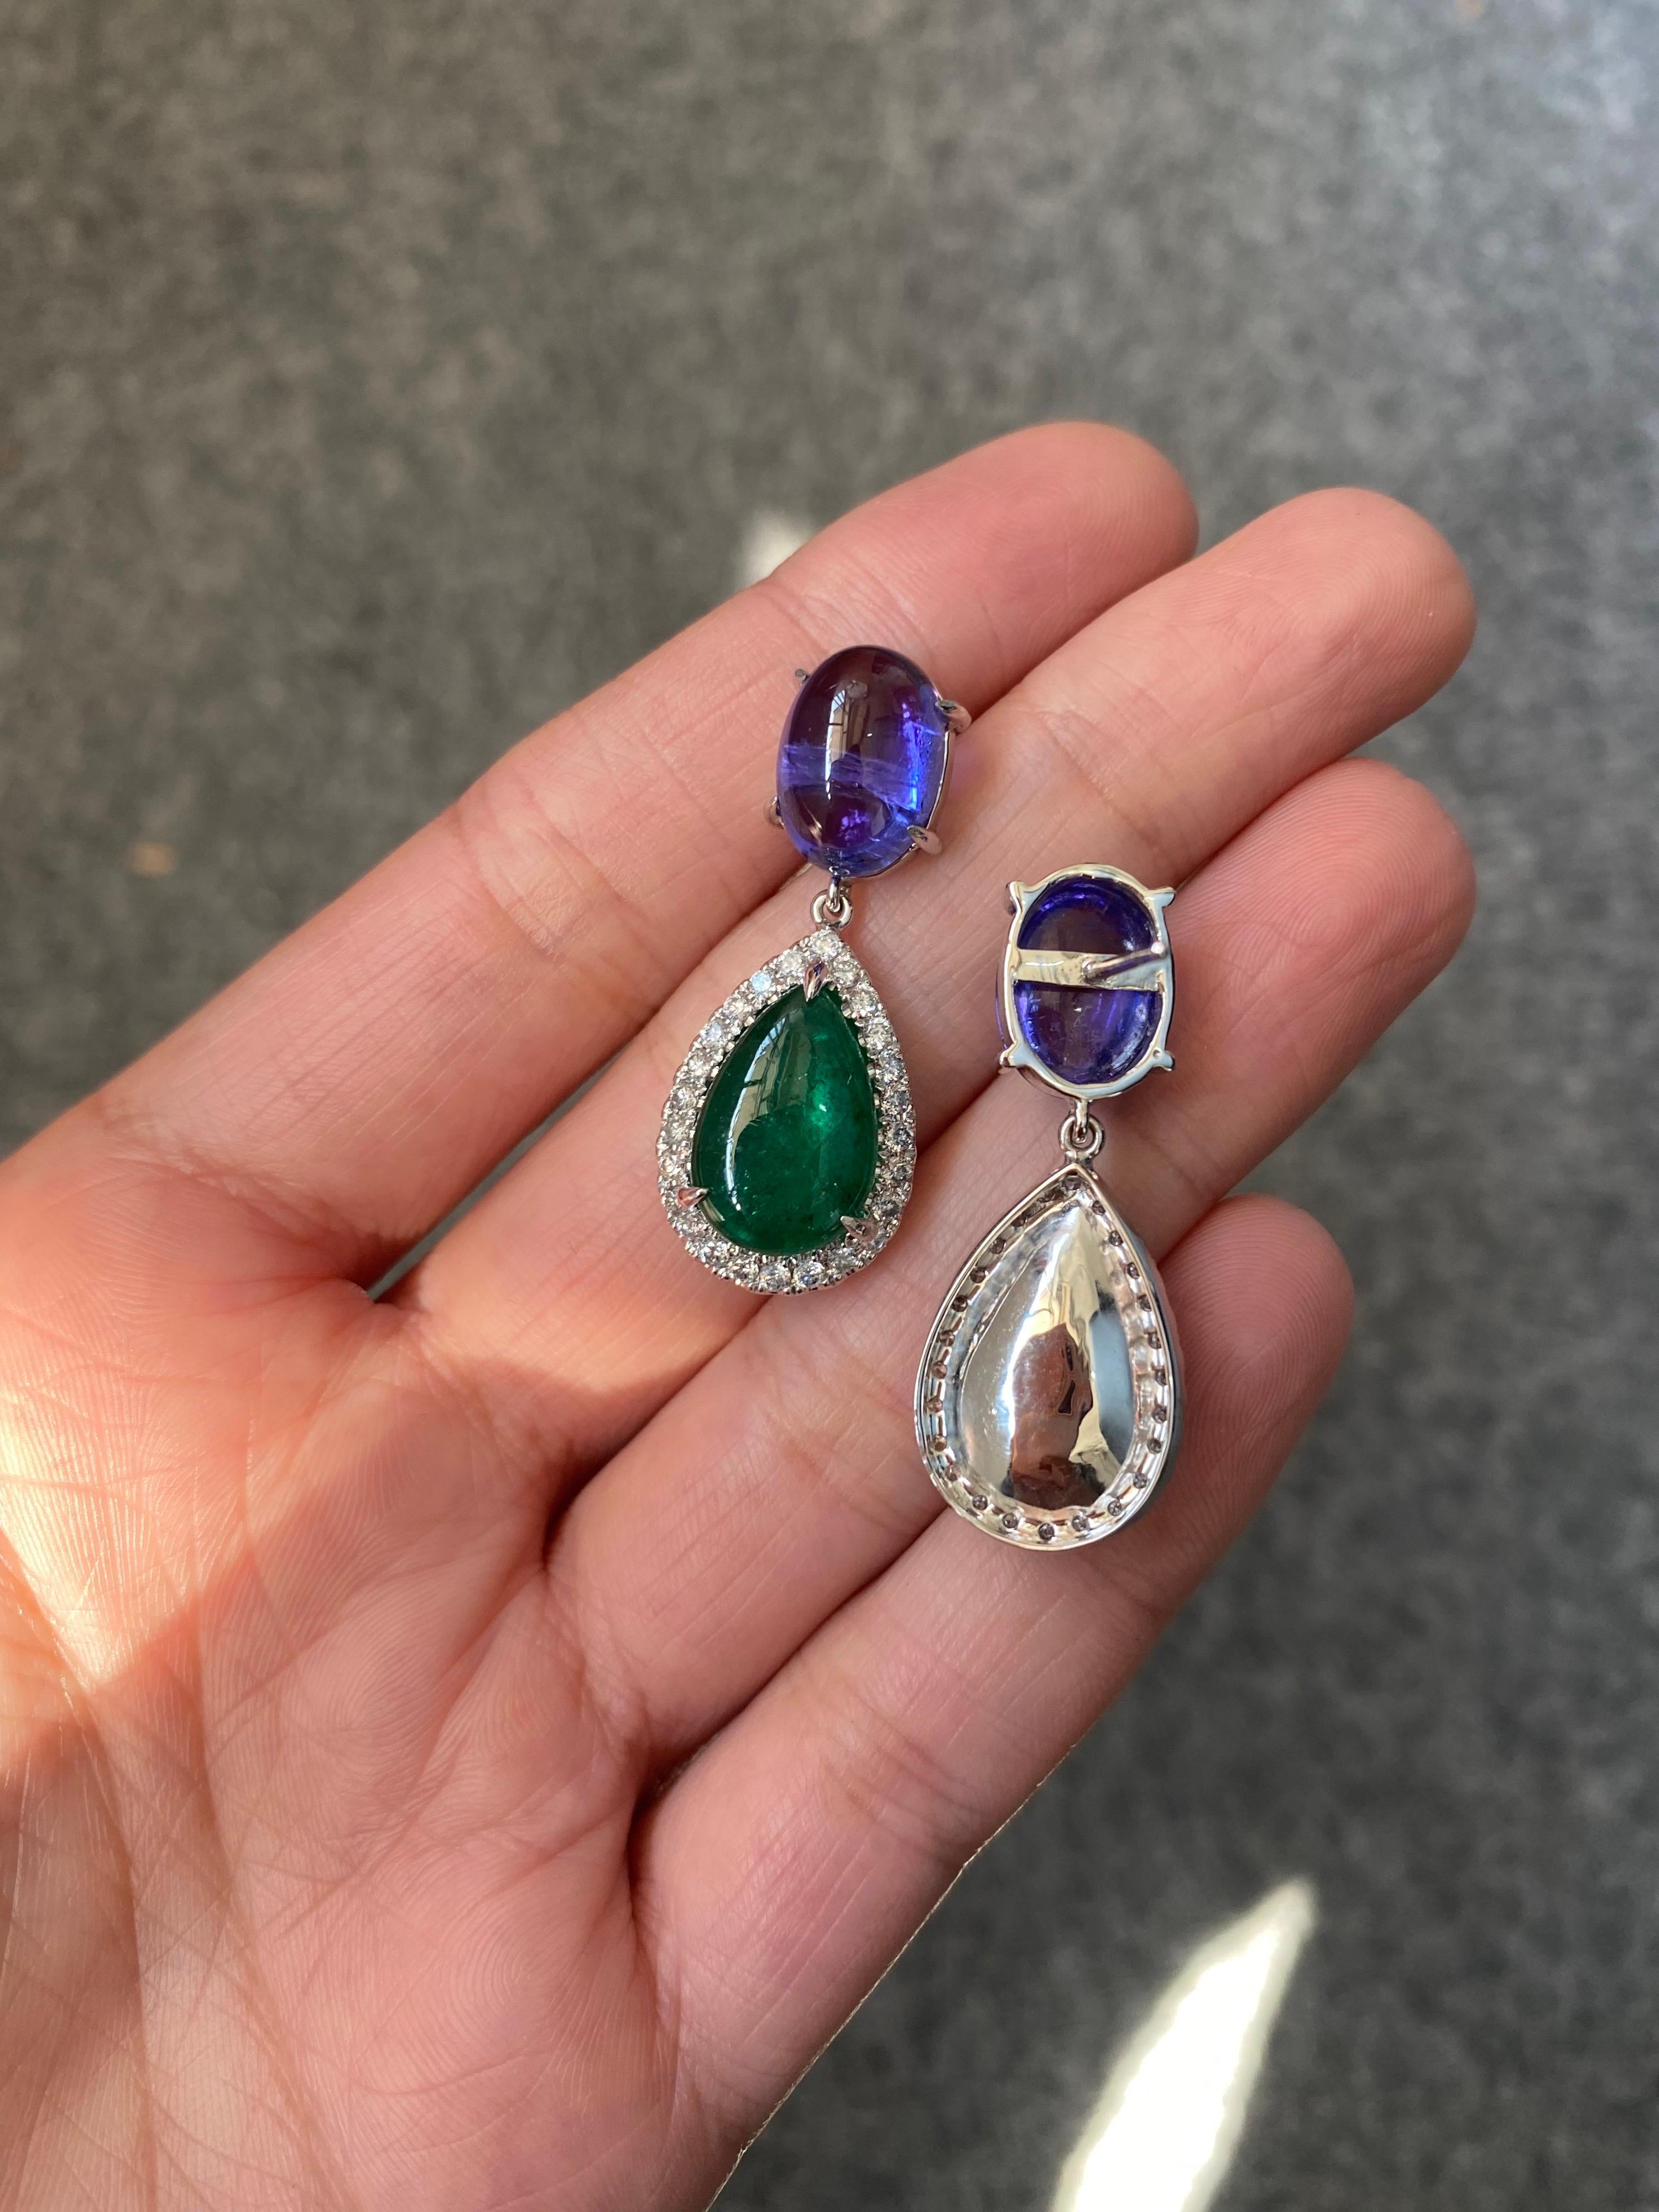 A beautiful combination of natural 10.84 carat Tanzanite cabochons and 10.89 carat pear shape natural Emerald cabochon, set in 18K White Gold with Diamonds. The gemstones are transparent and have great luster and color to them. The earrings are